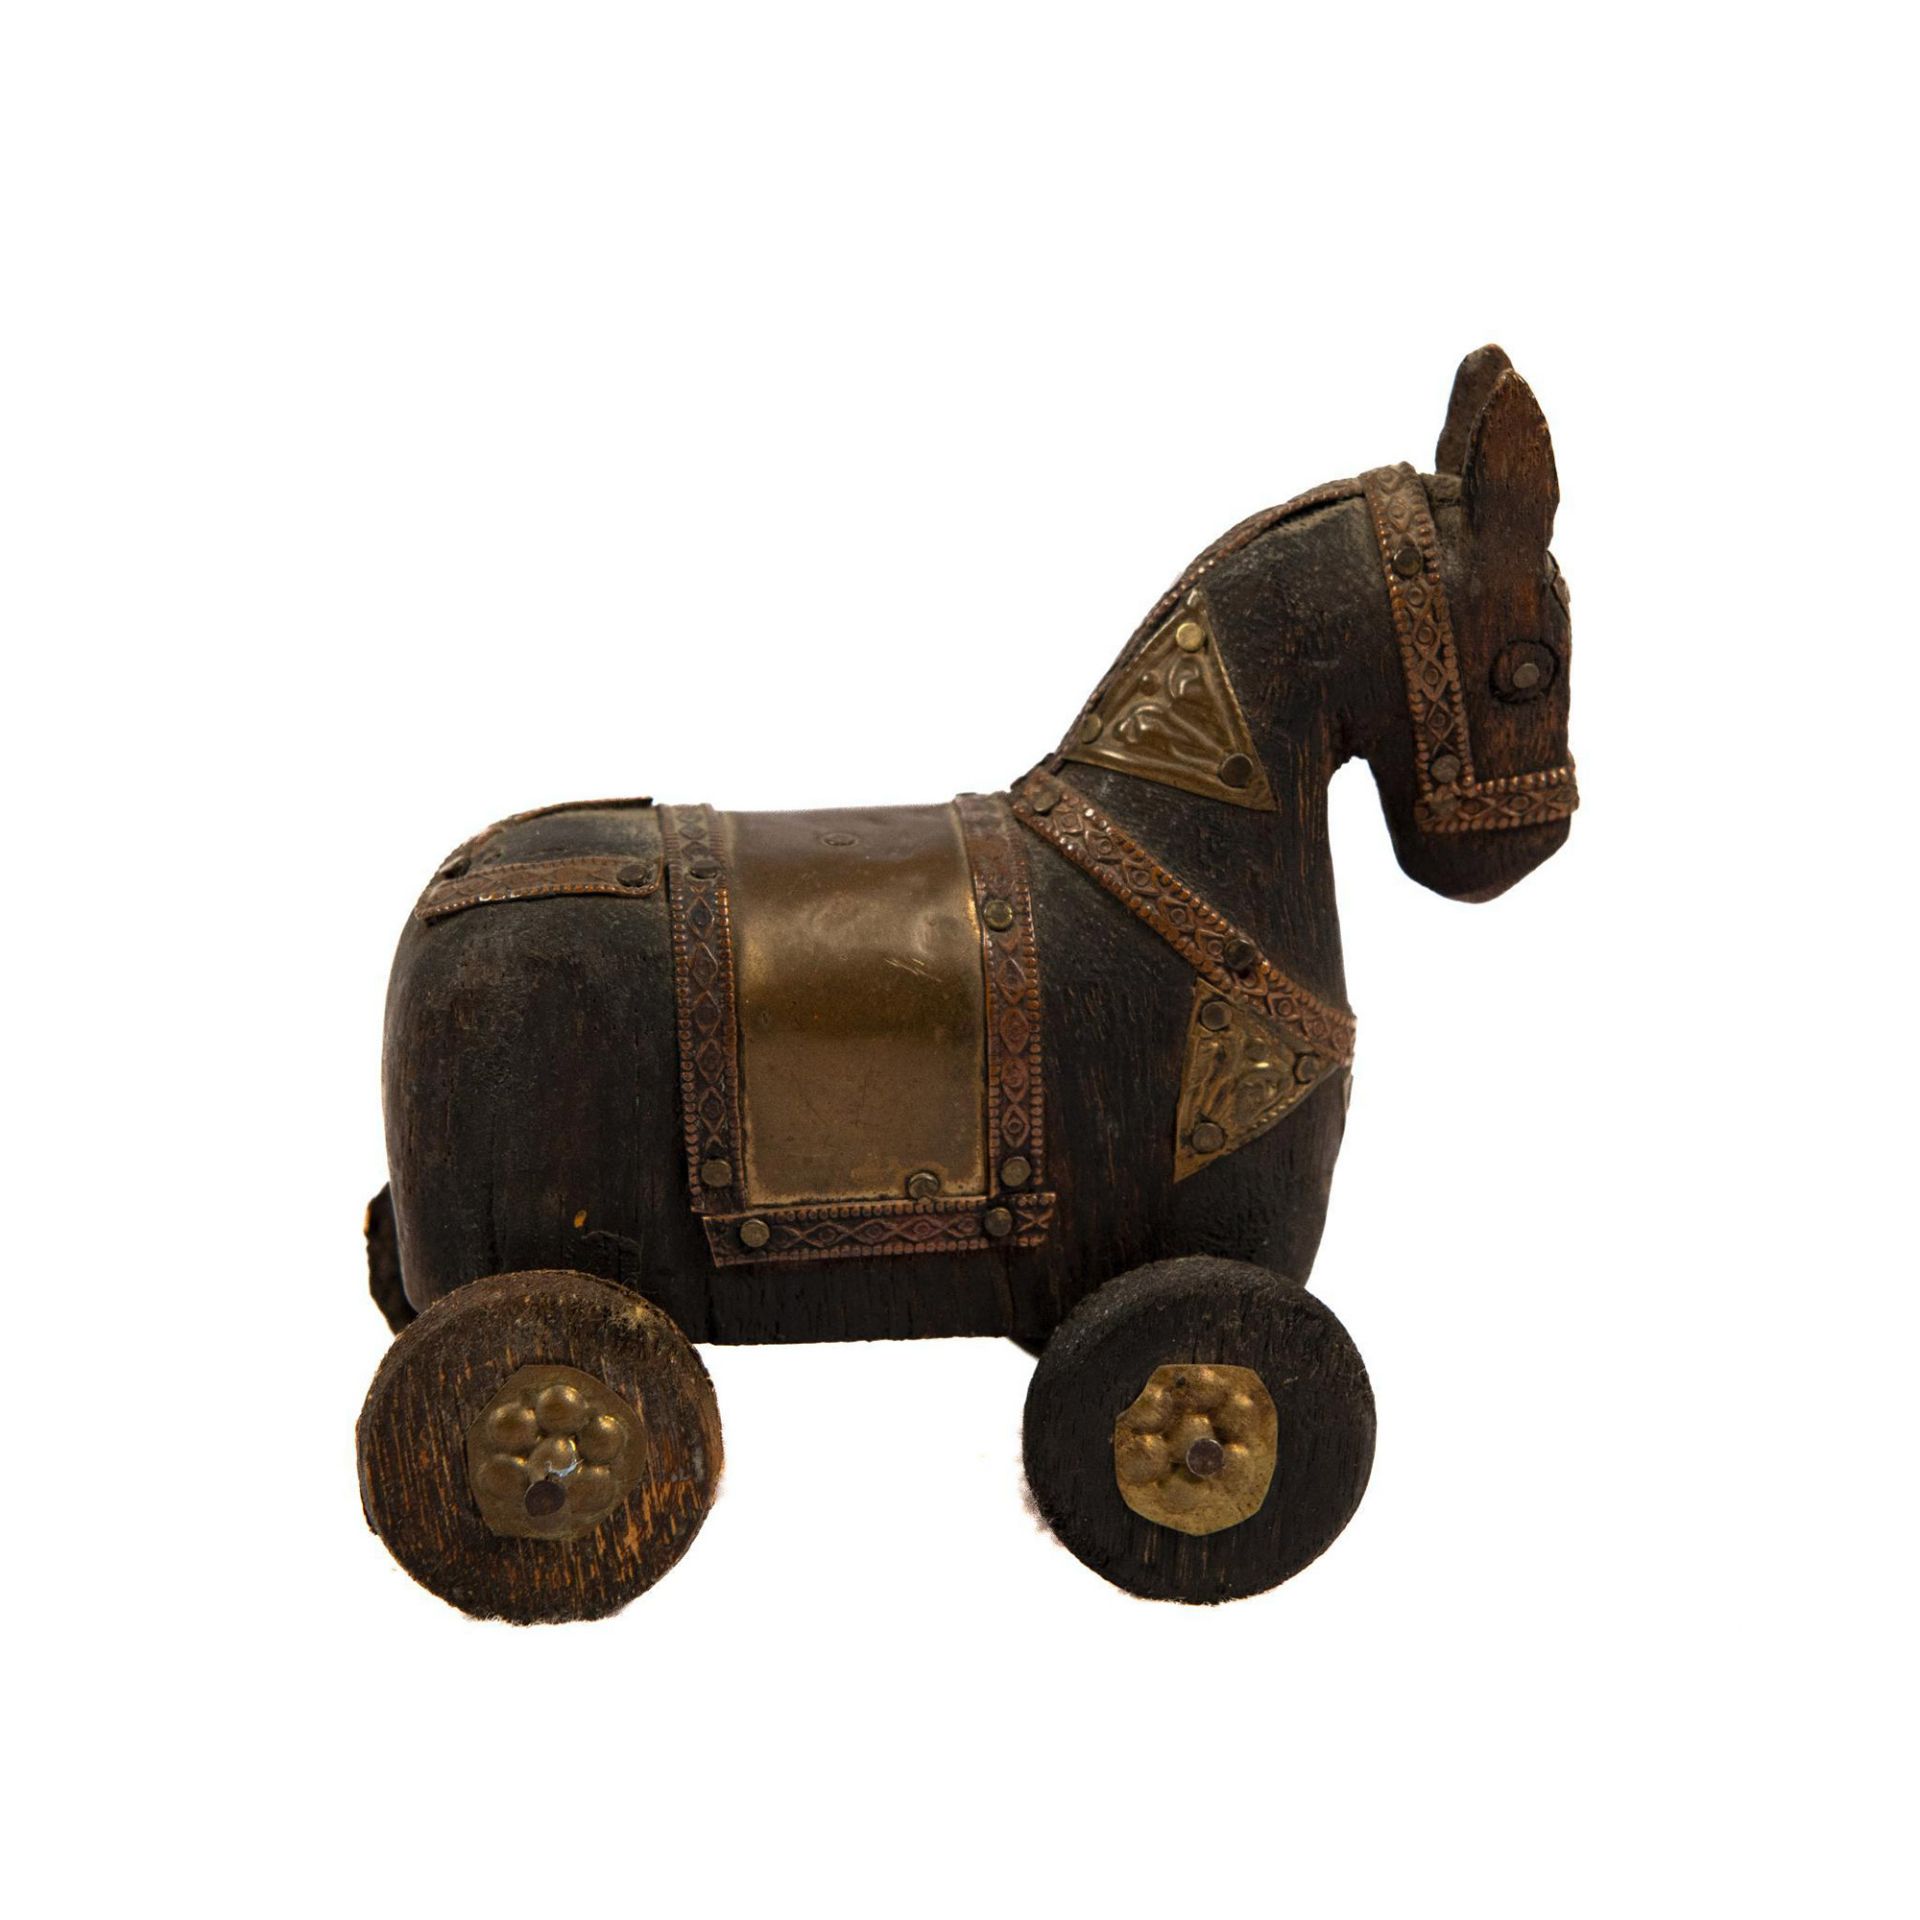 Antique Handcrafted Rajasthani Horse on Wheels - Image 3 of 4